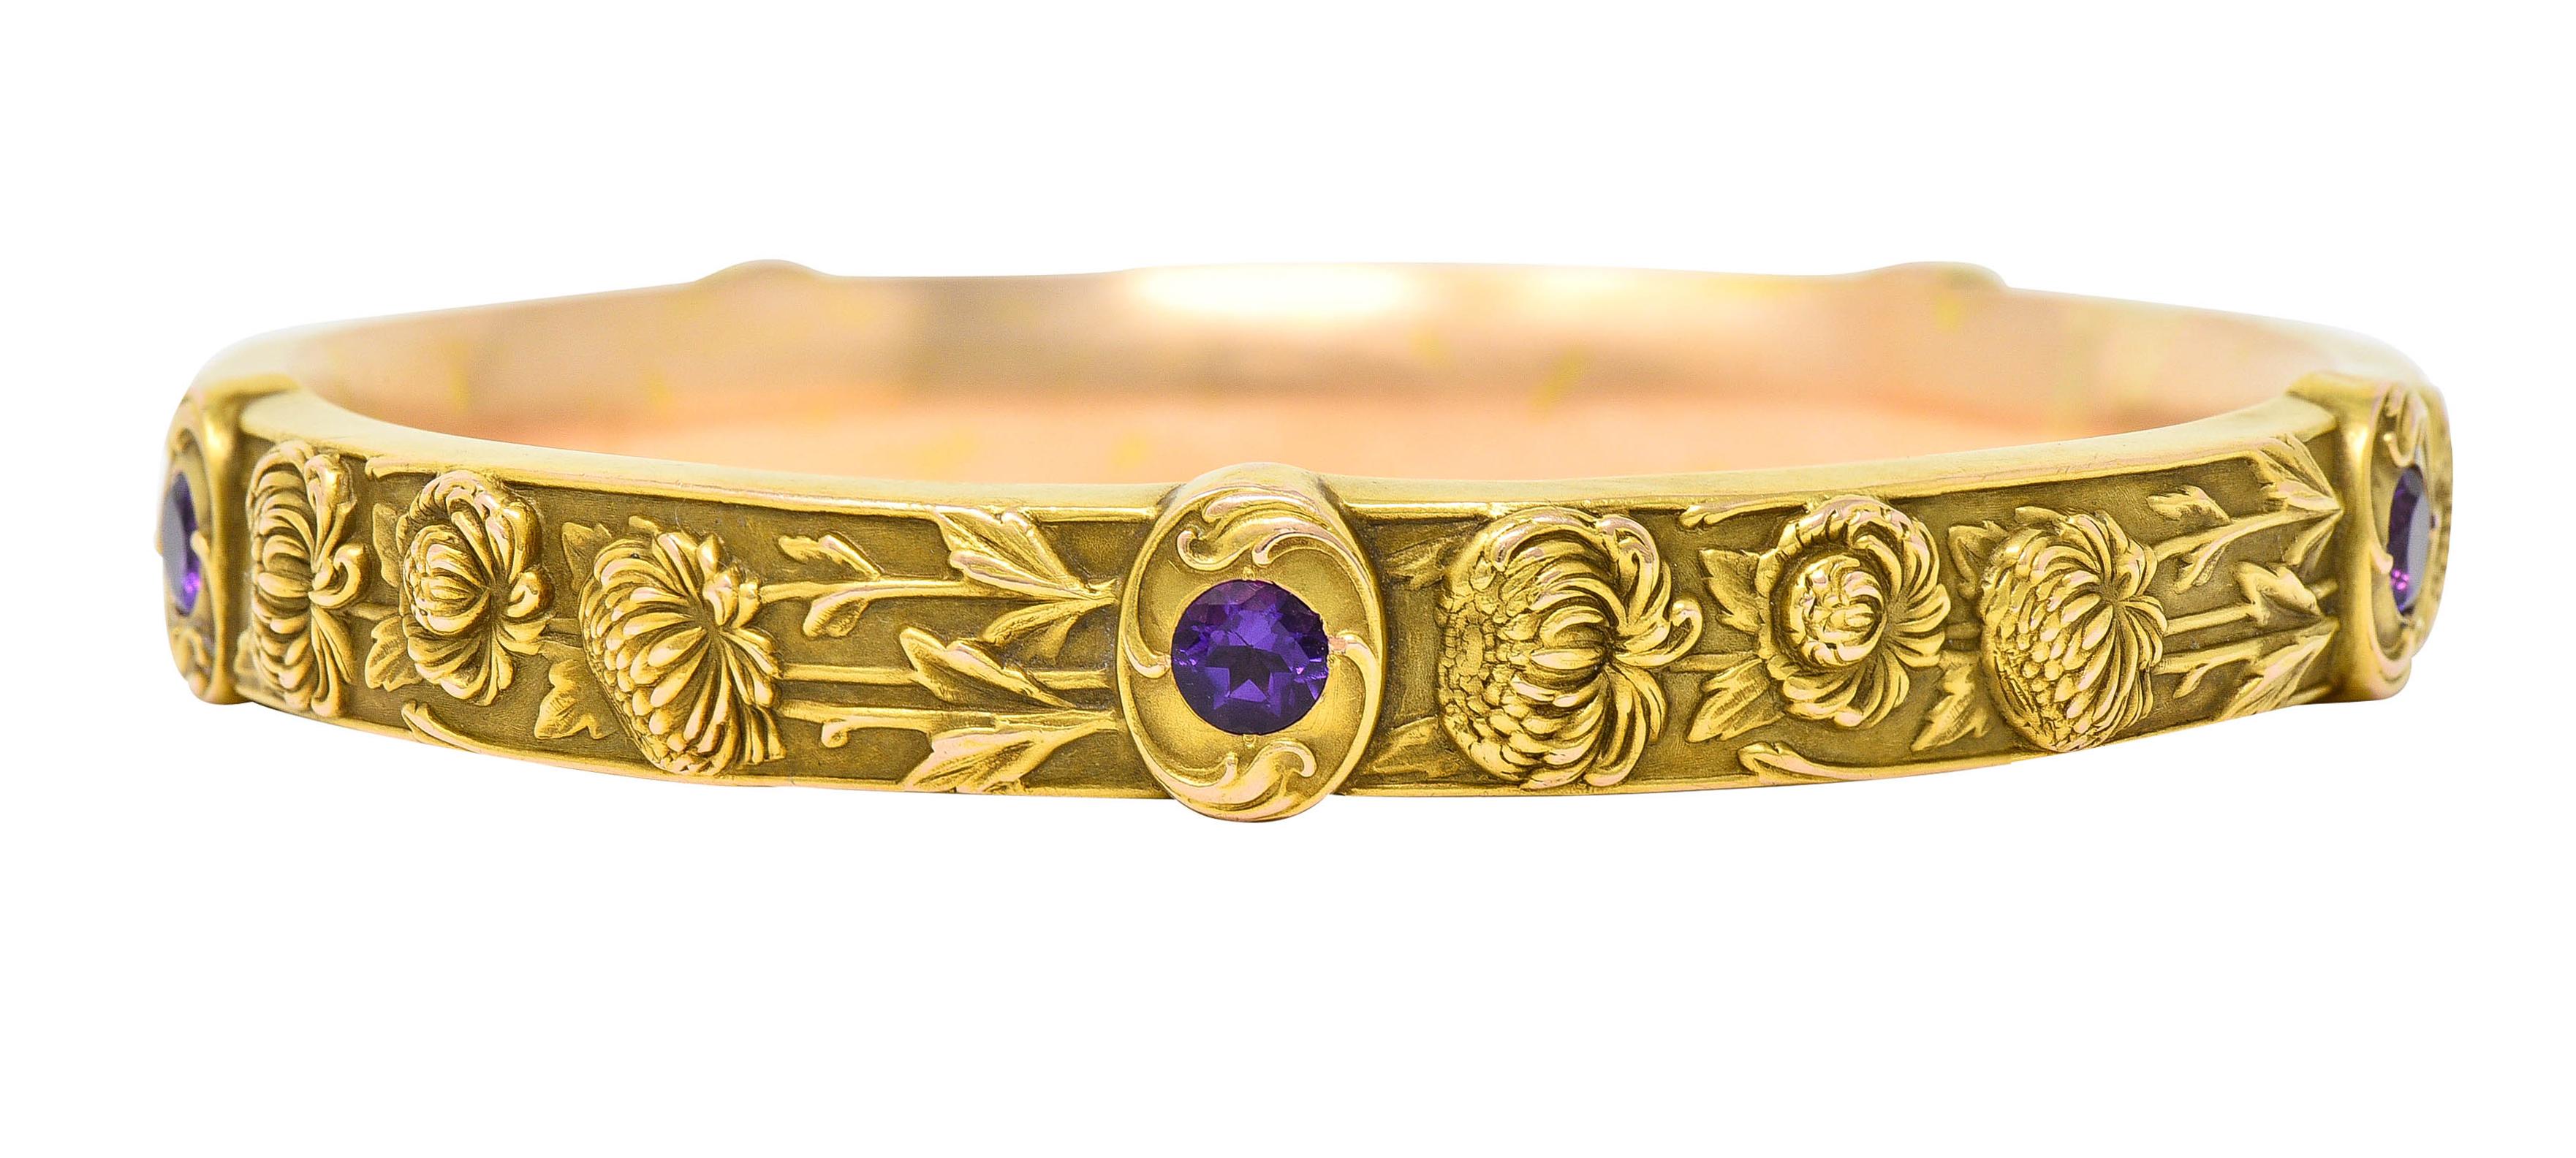 Bangle style bracelet features raised highly rendered chrysanthemums

Accented by five swirled frame stations - each centering a 4.0 mm round cut amethyst

Amethysts are a deeply saturated transparent pinkish purple

Stamped 14k for 14 karat